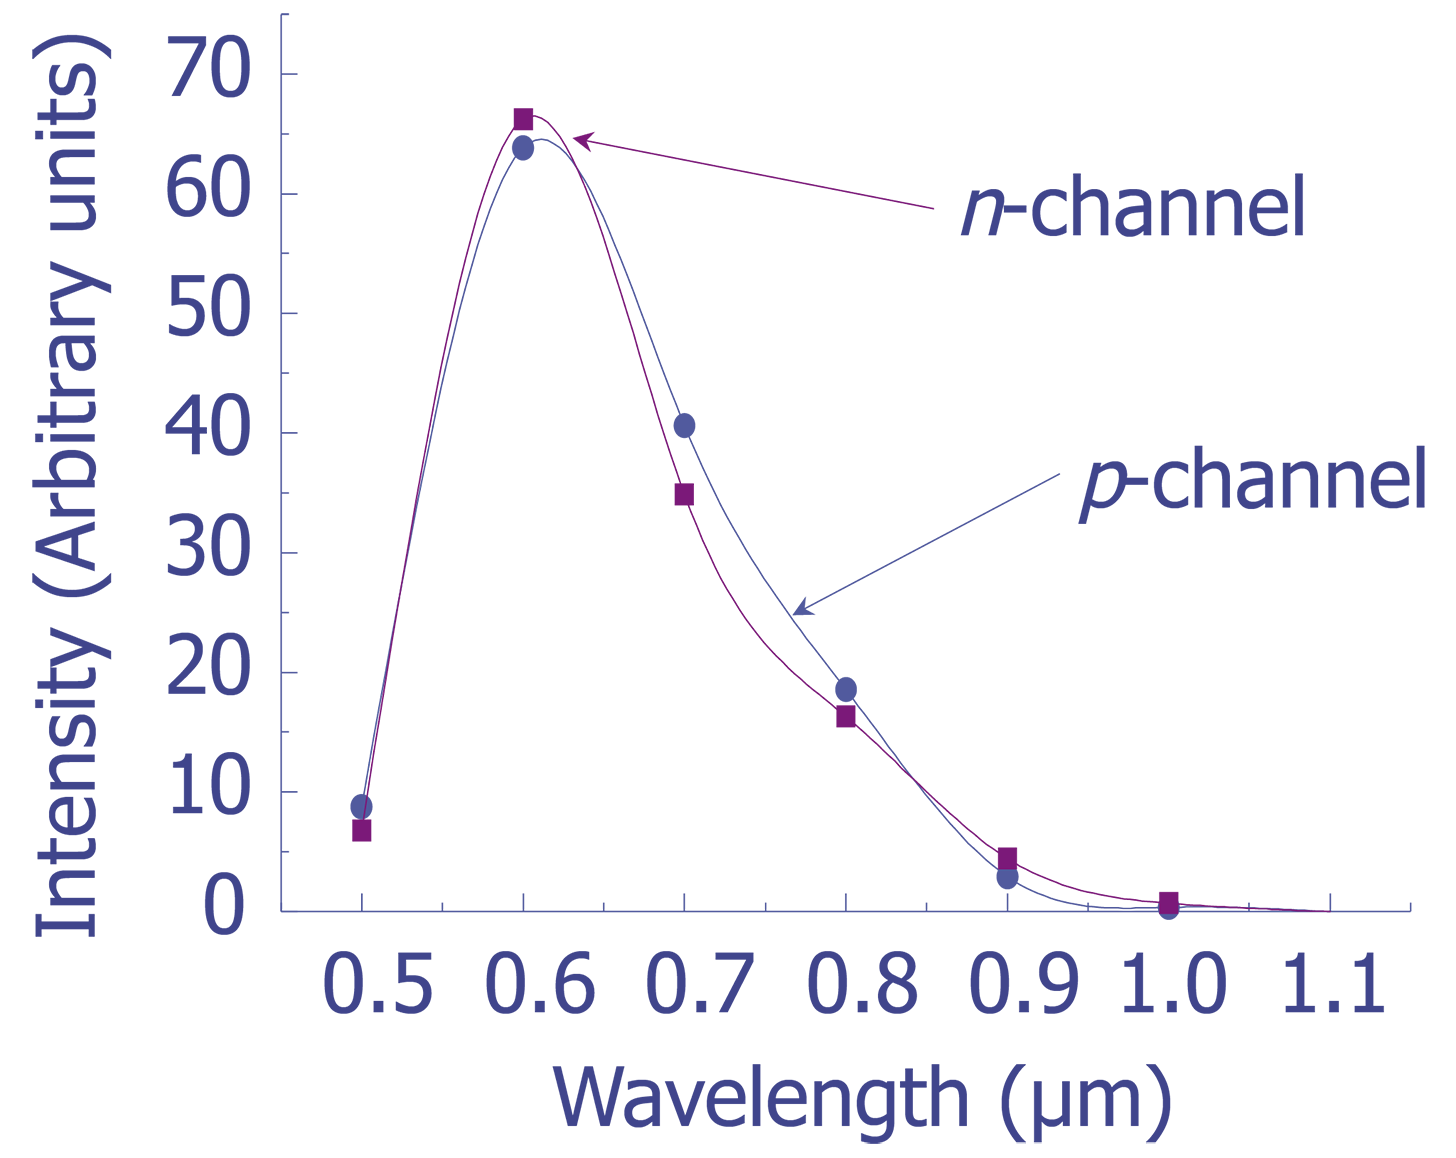 Comparison of spectra from gate oxide shorts in both n- and p-channel MOSFETs; note the similarity.